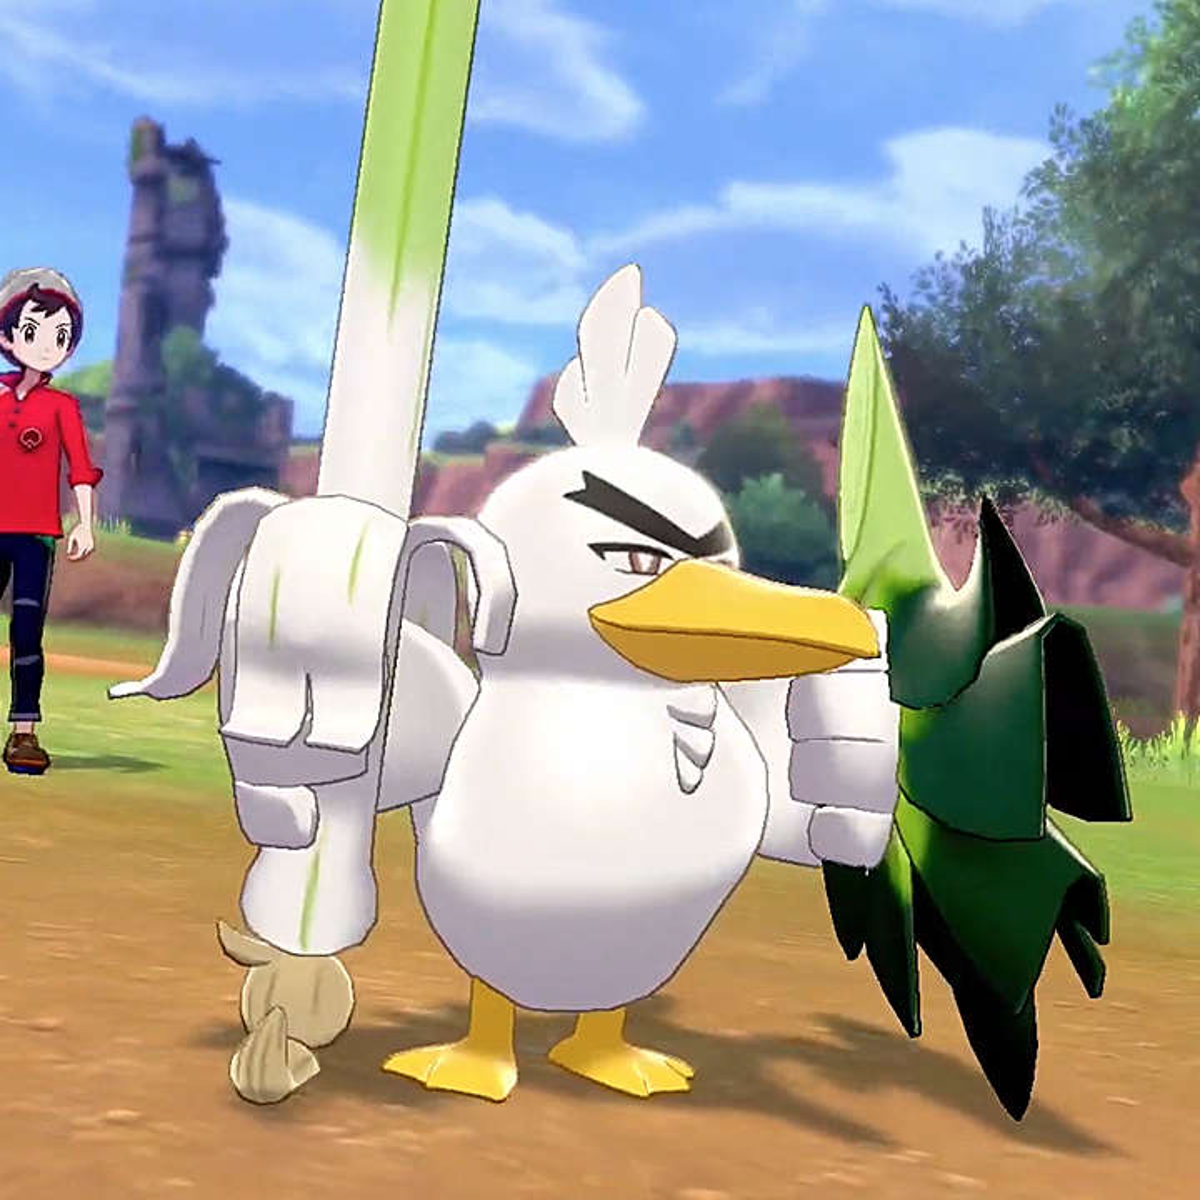 Could This Abandoned Farfetch'd Evolution Be in Pokemon Sword and